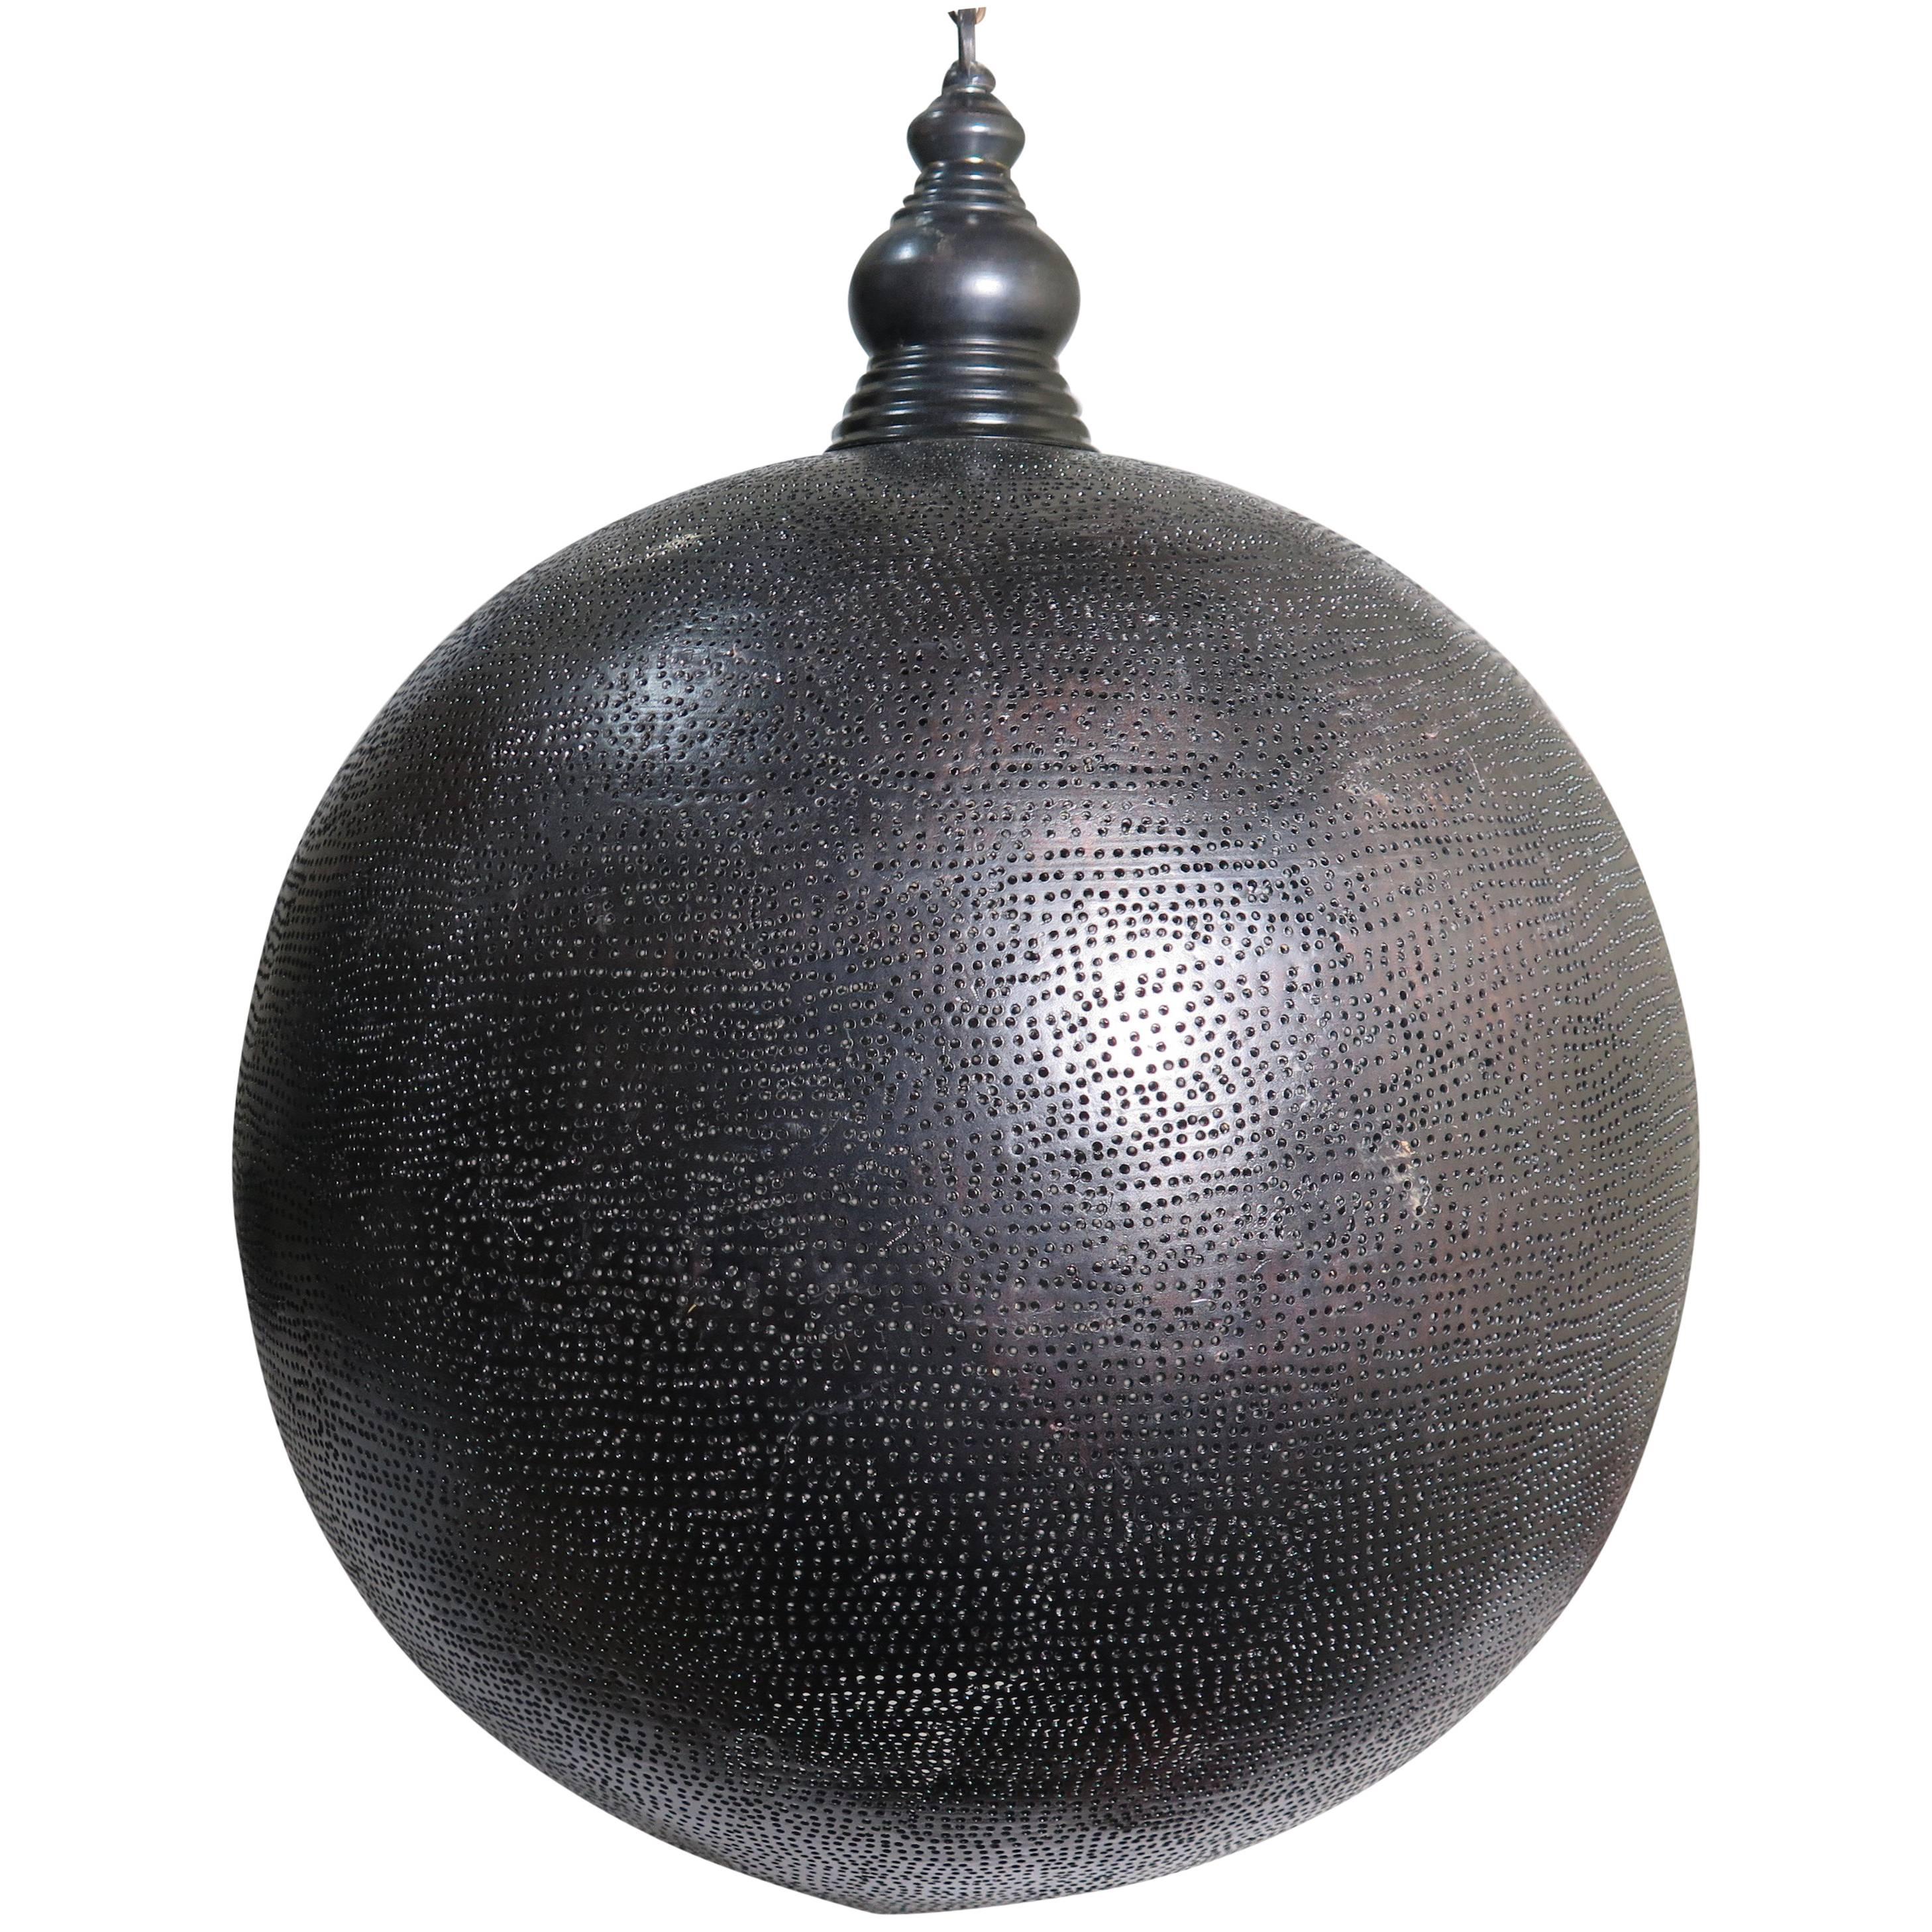 "Lobo Orb" in Black by Haskell Design For Sale